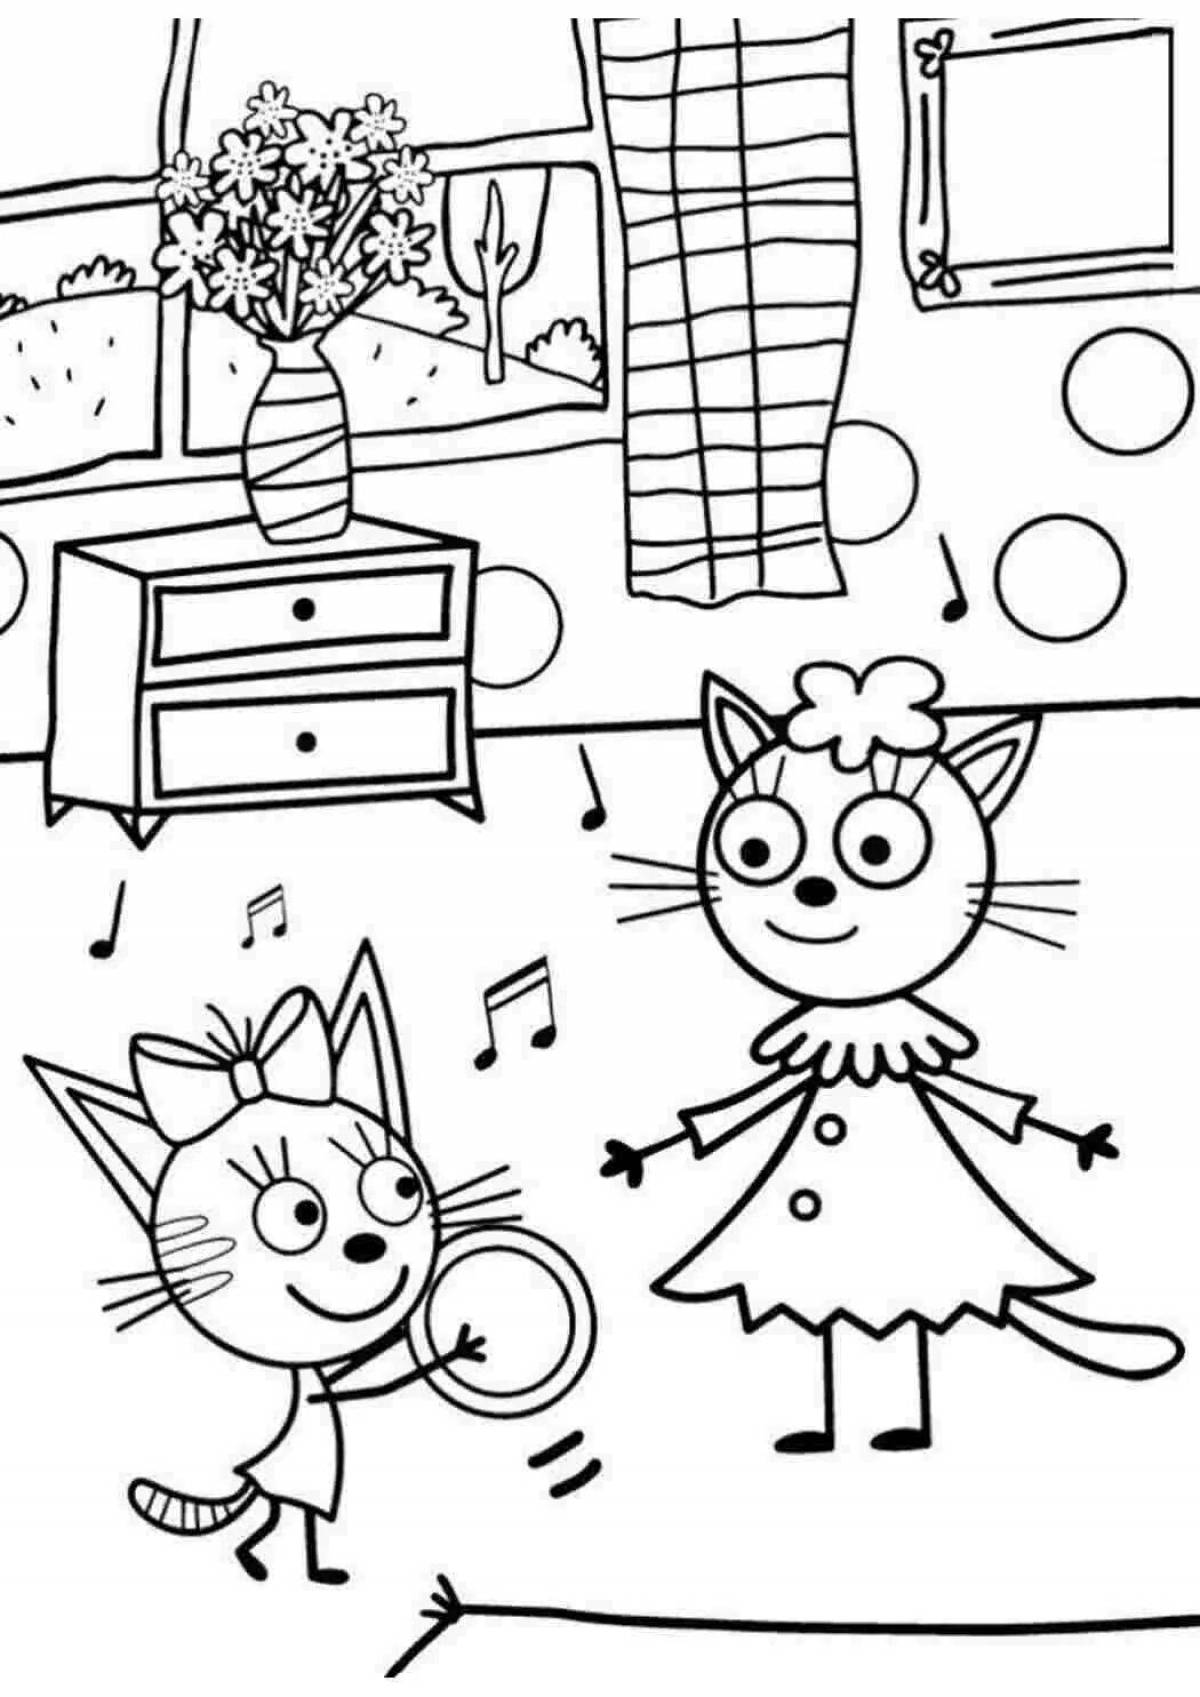 Animated view page of three cats